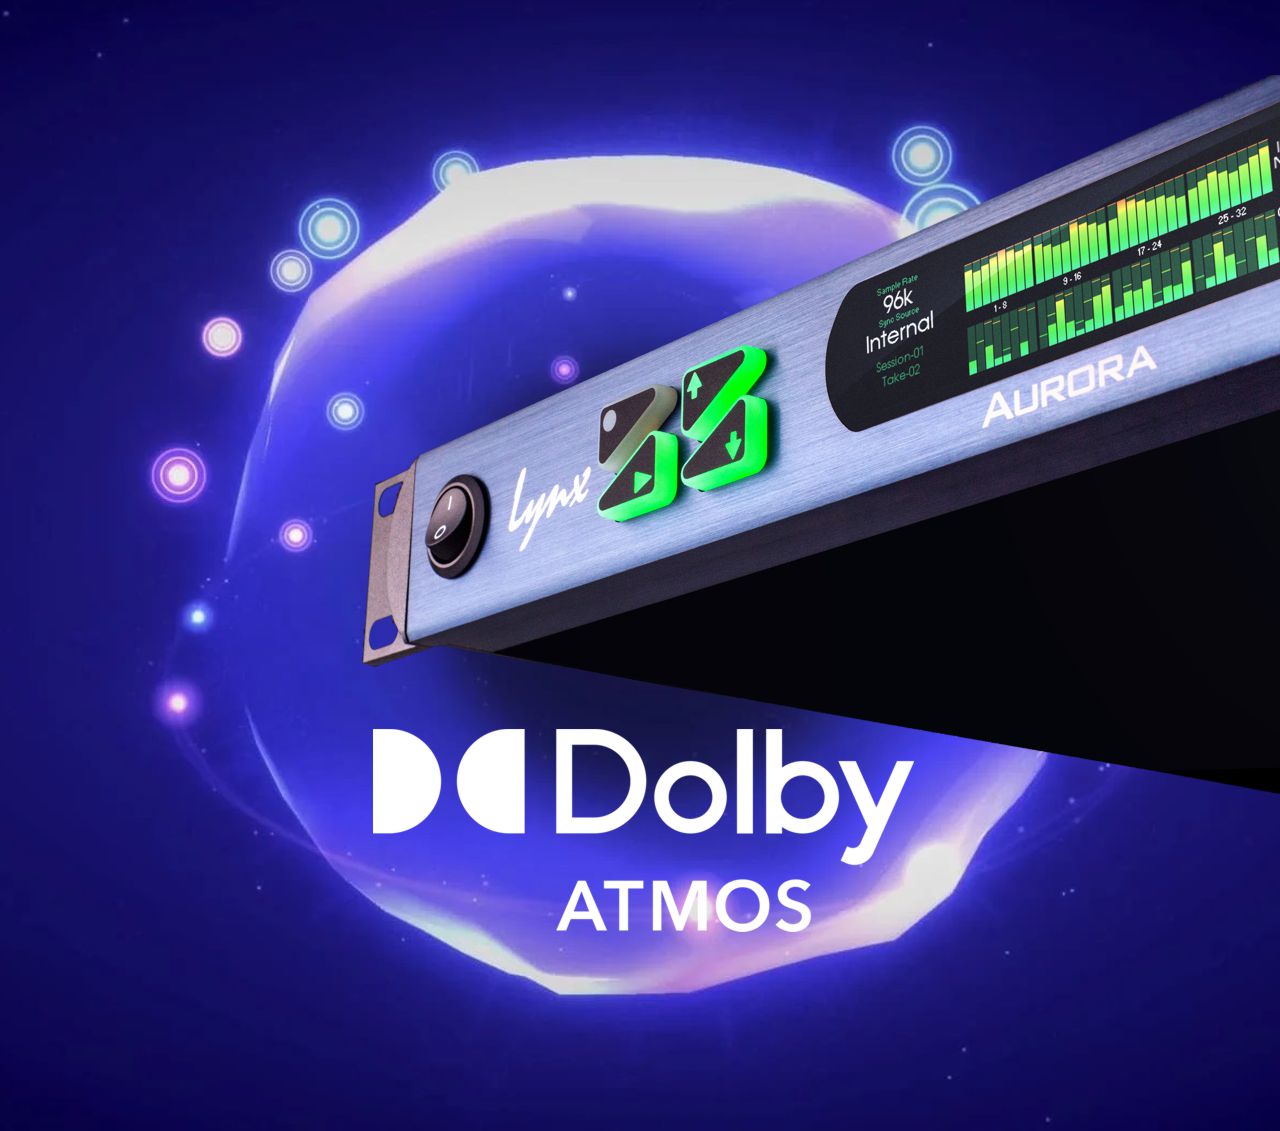 Dolby Atmos compatibility with the Aurora N